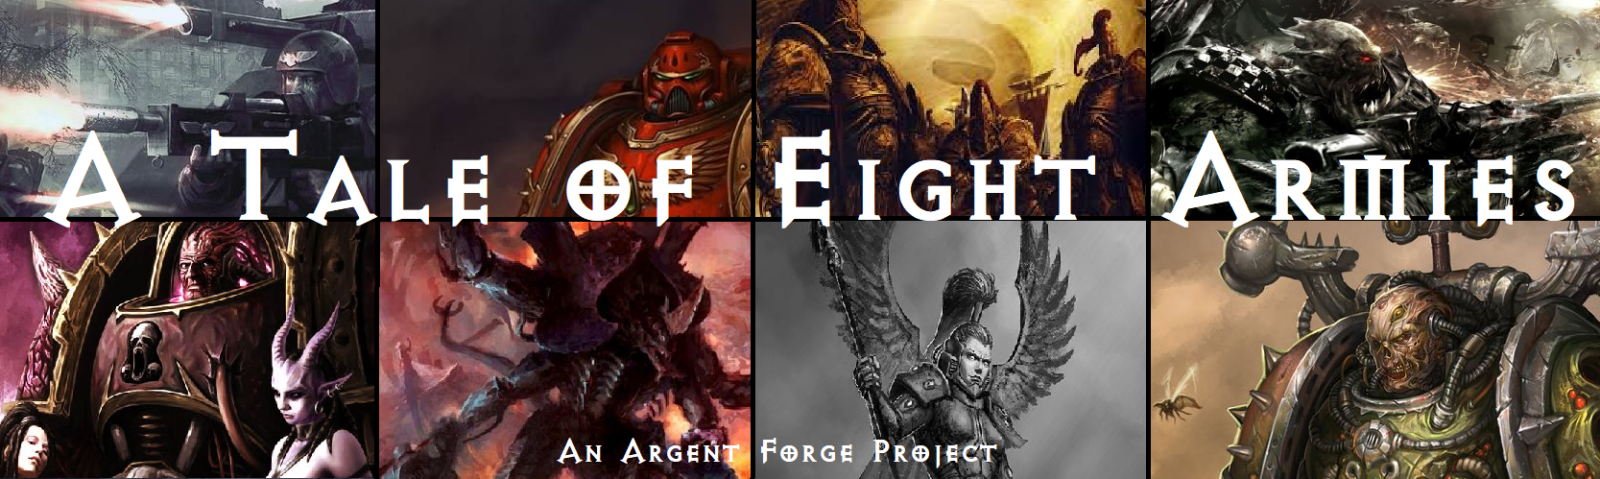 Tale of Eight Armies